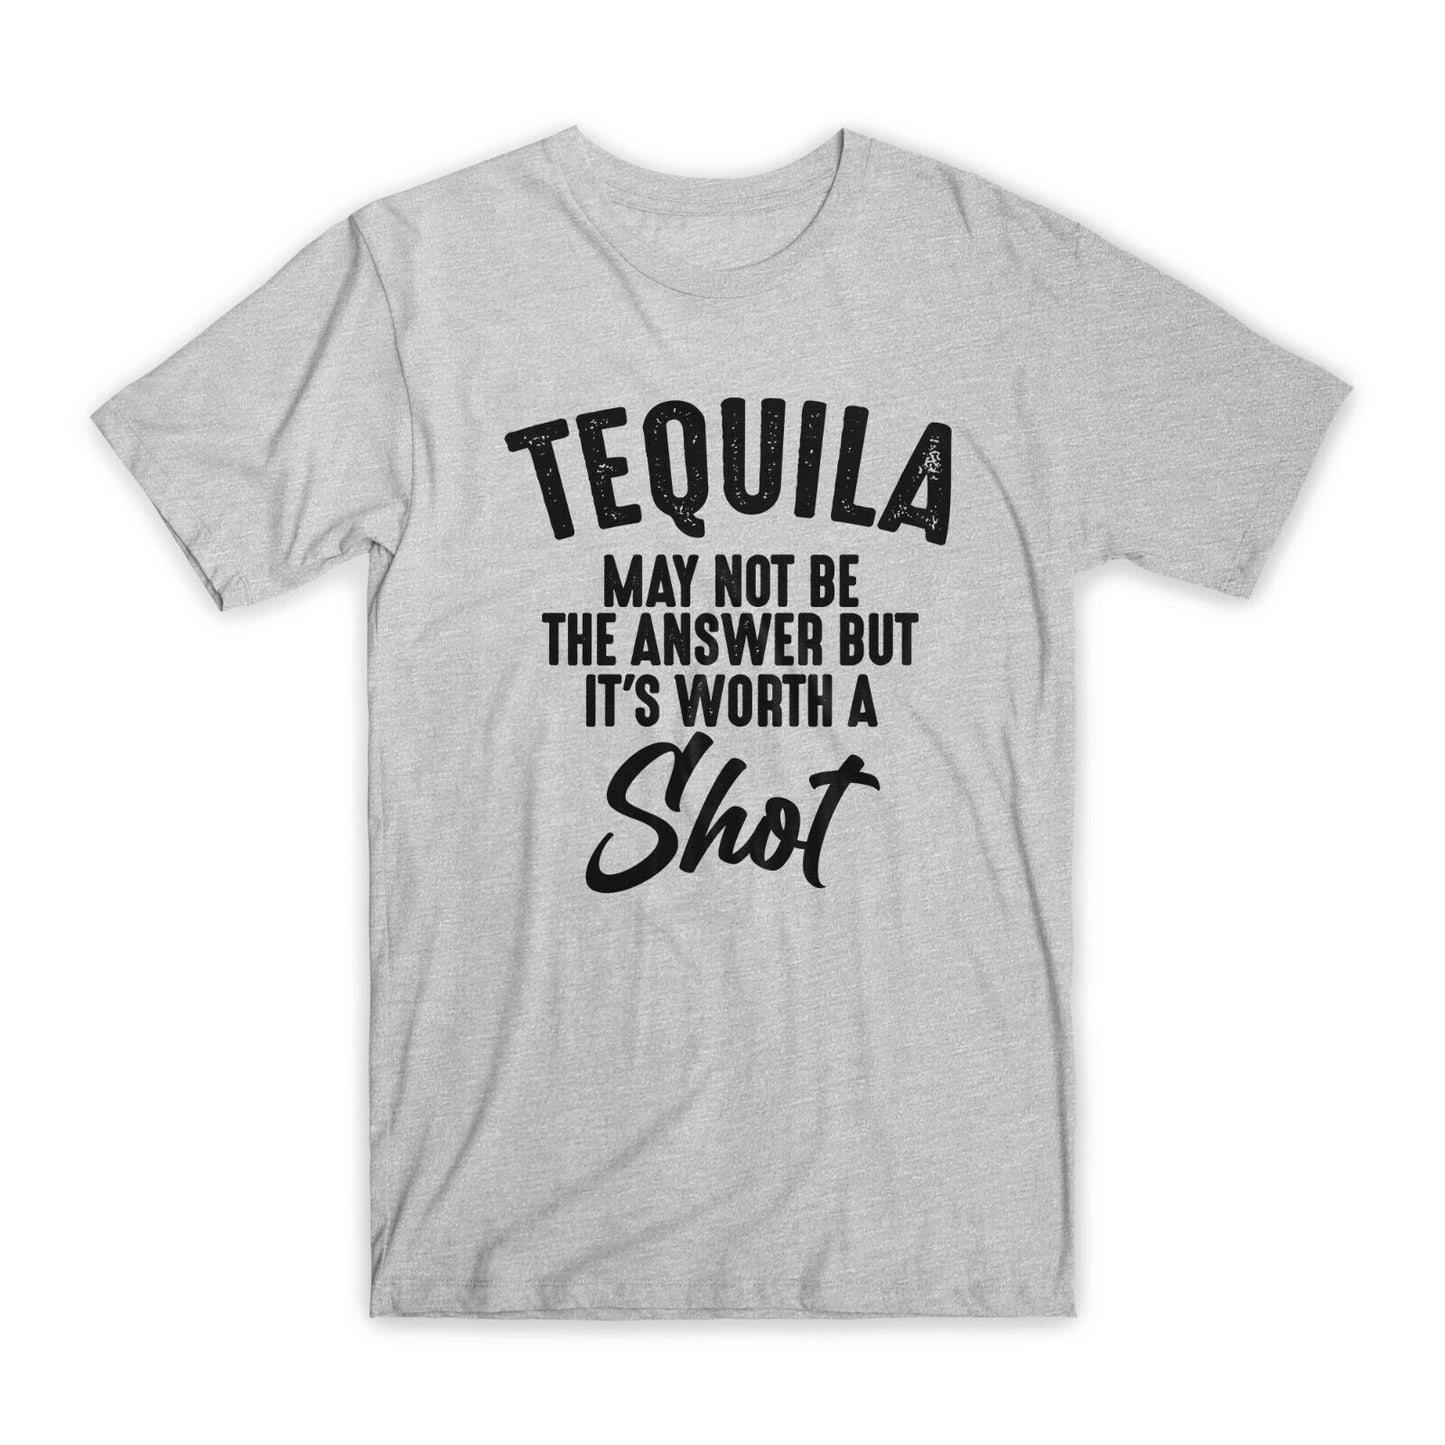 Tequila May Not Be The Answer T-Shirt Premium Soft Cotton Funny Tees Gift NEW